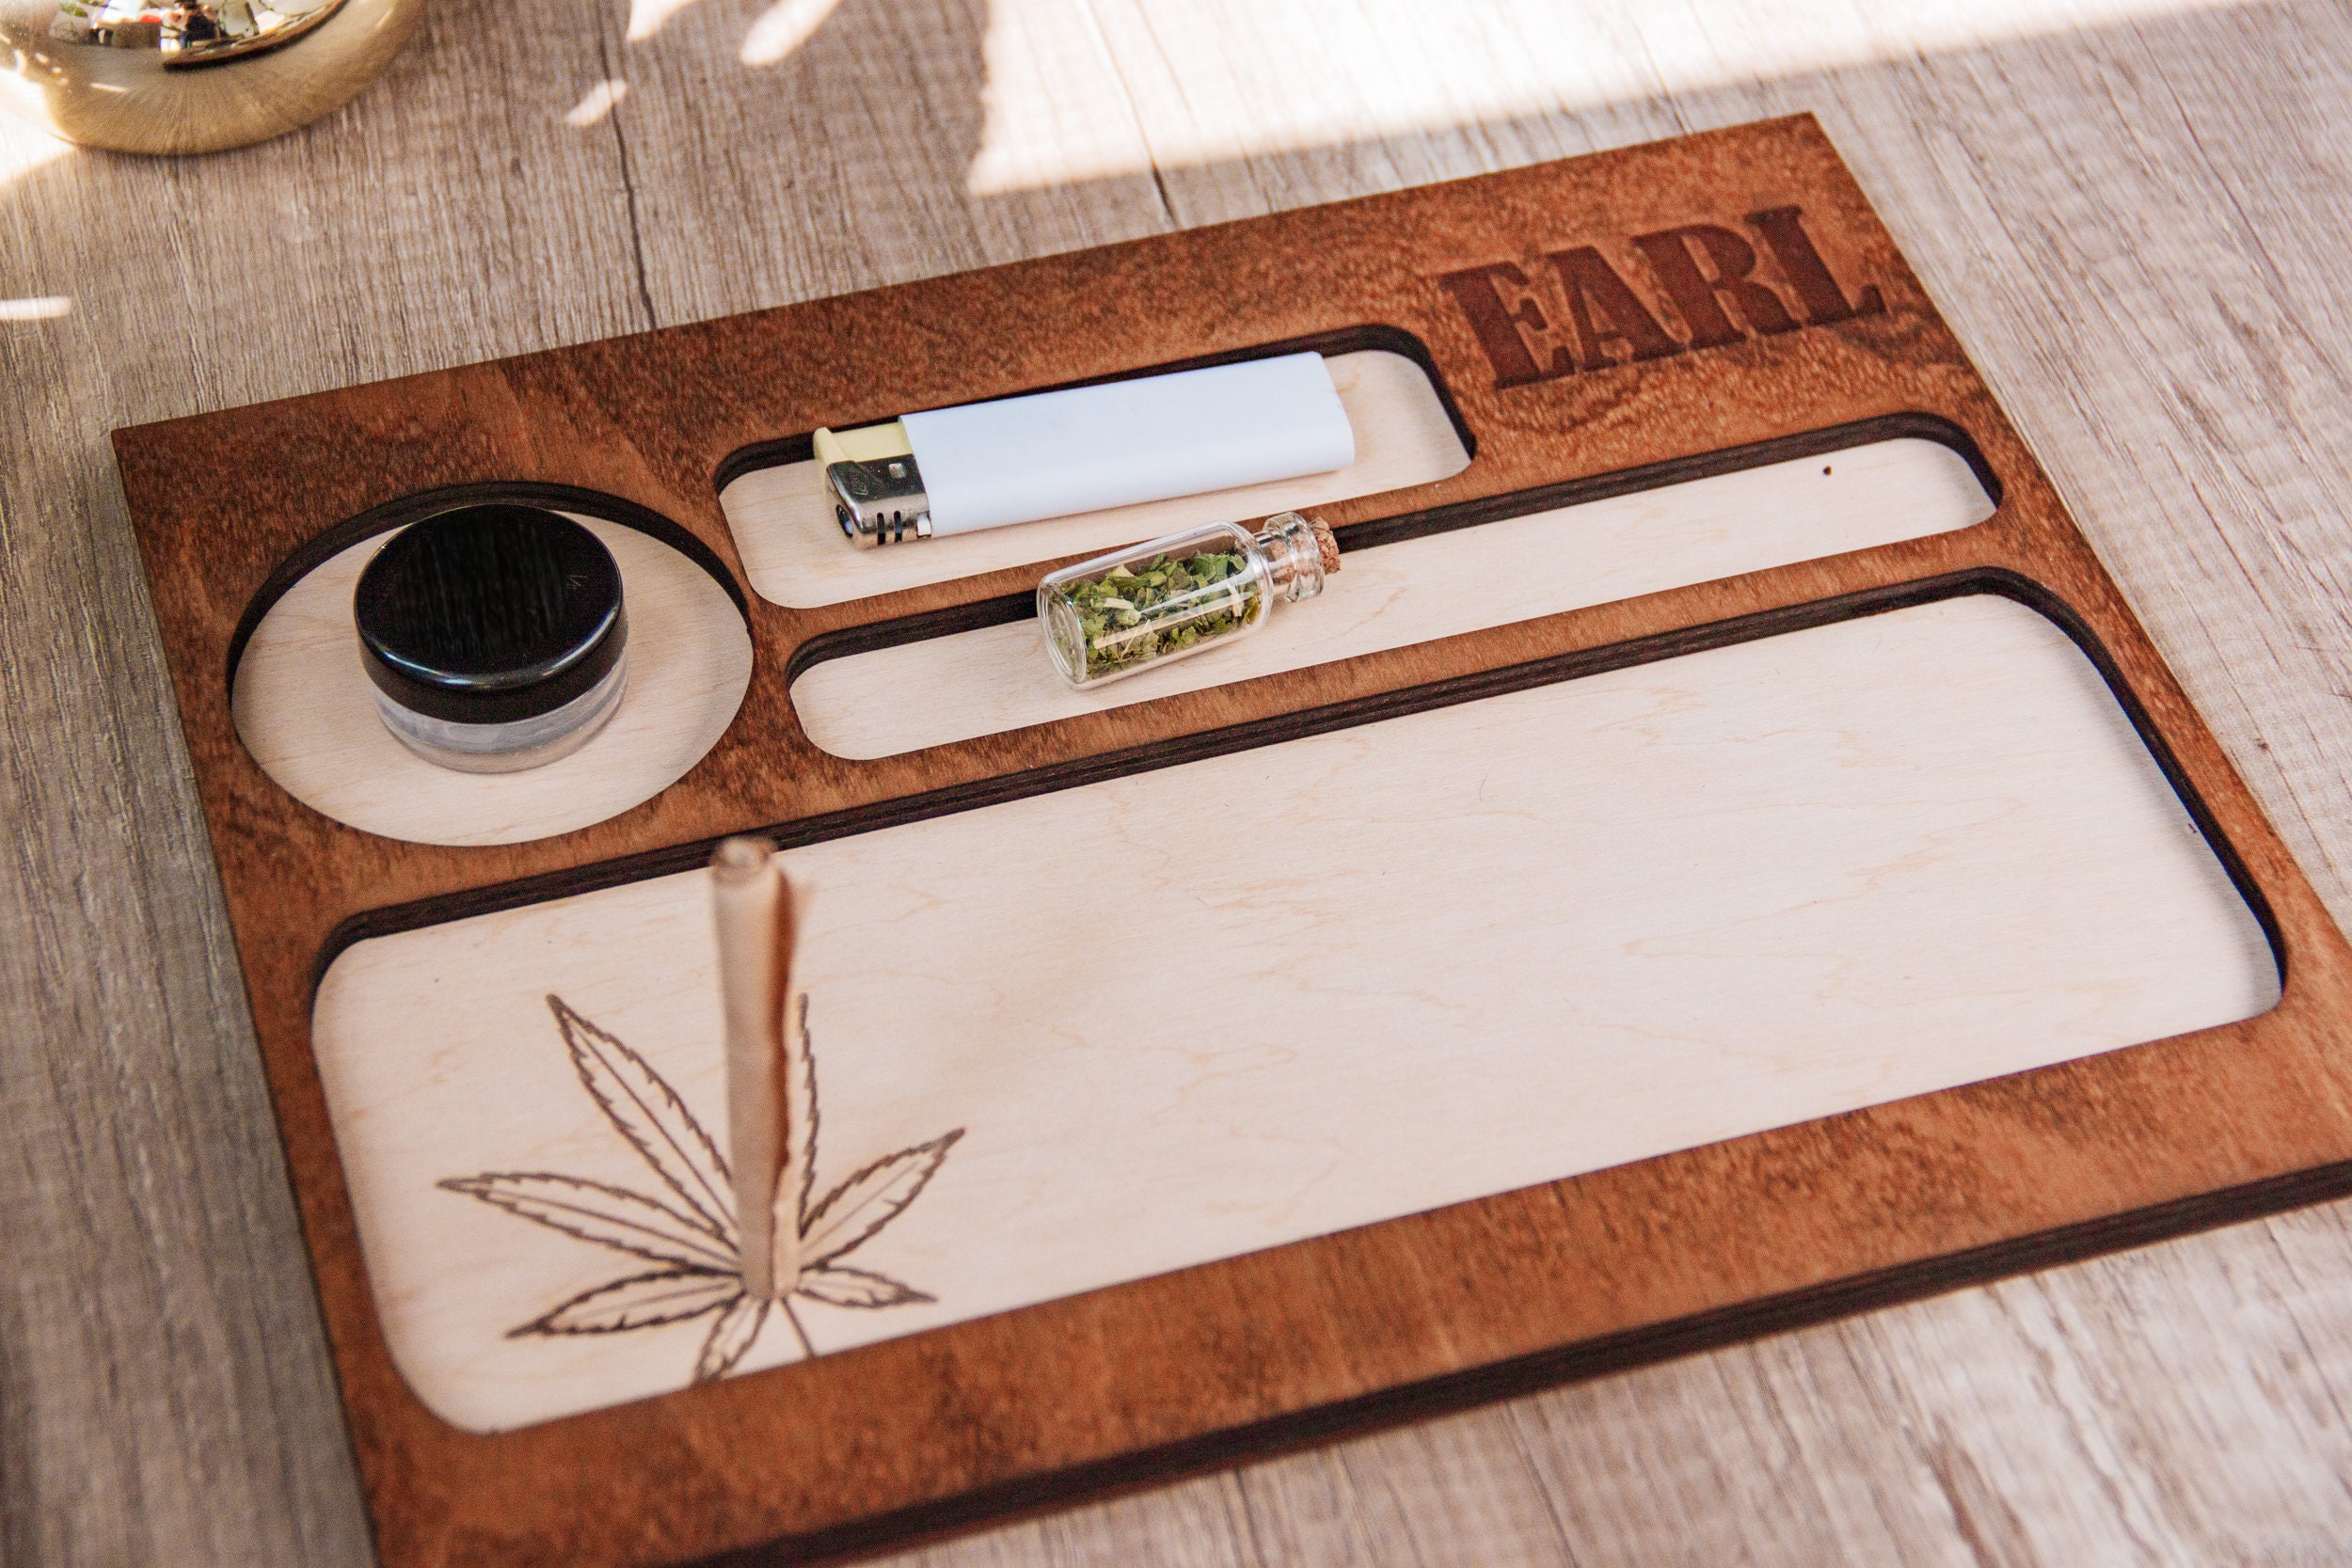 5 Piece Custom Rolling Tray Set for Tobacco or Cannabis Kush Queen 